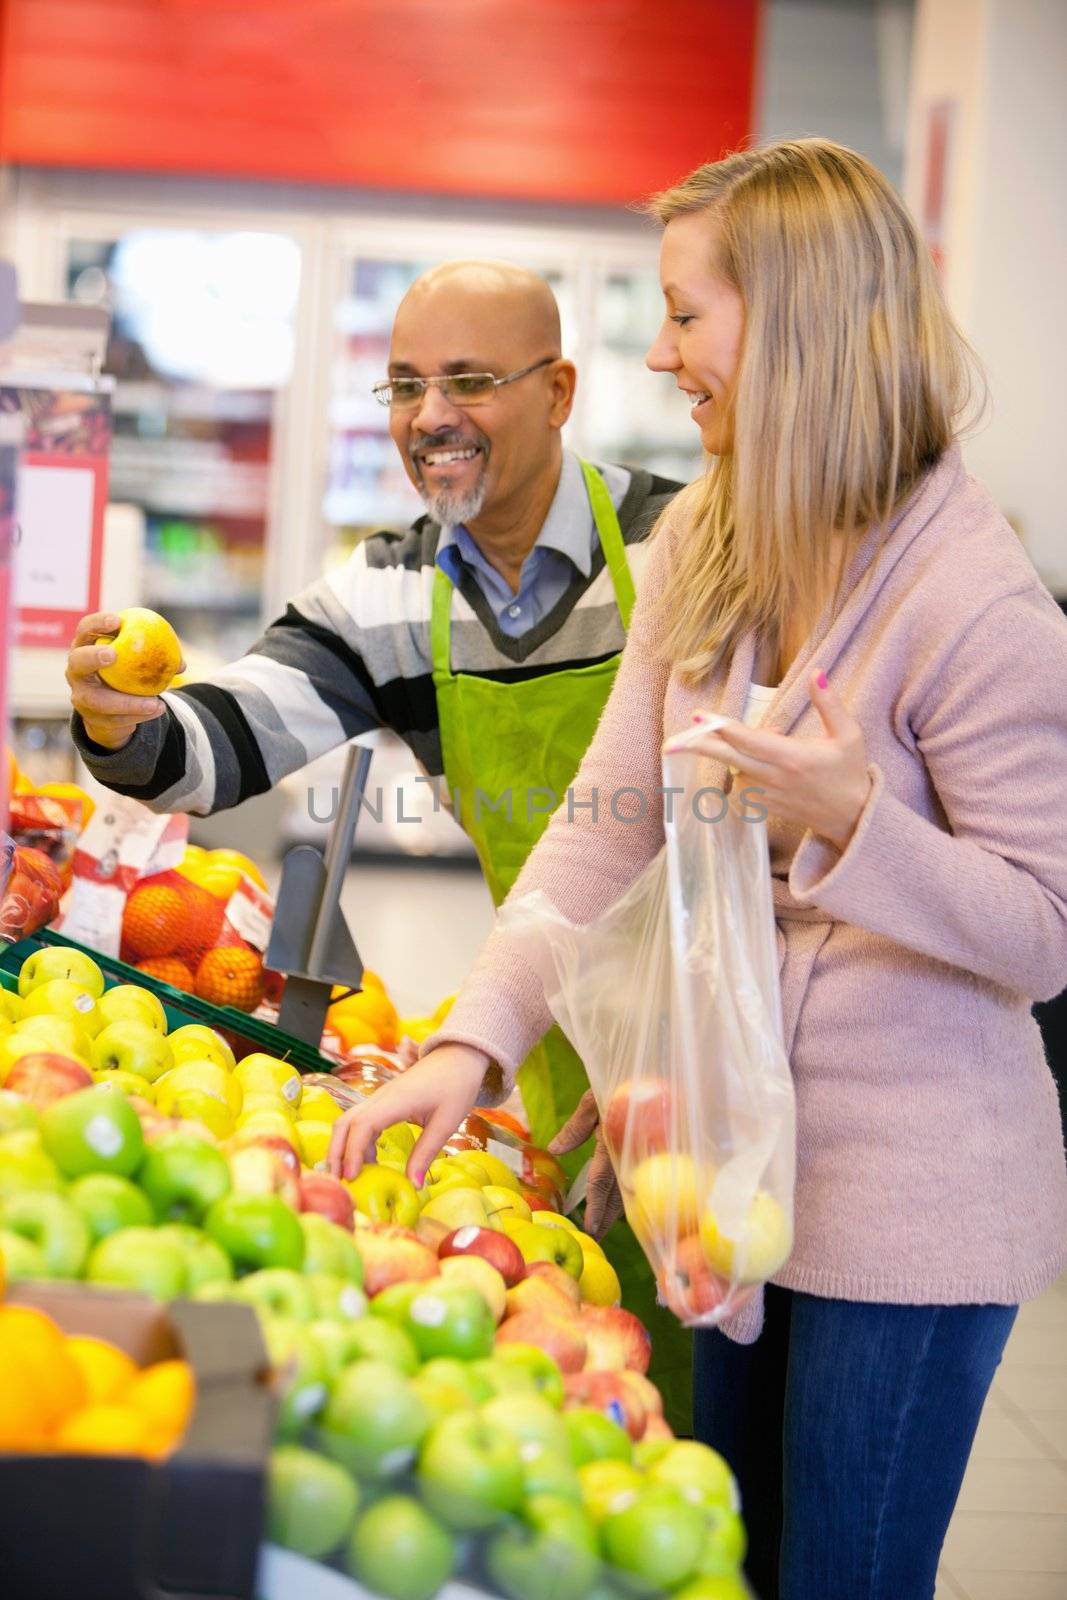 Happy young woman buying fruits with shop assistant in the background